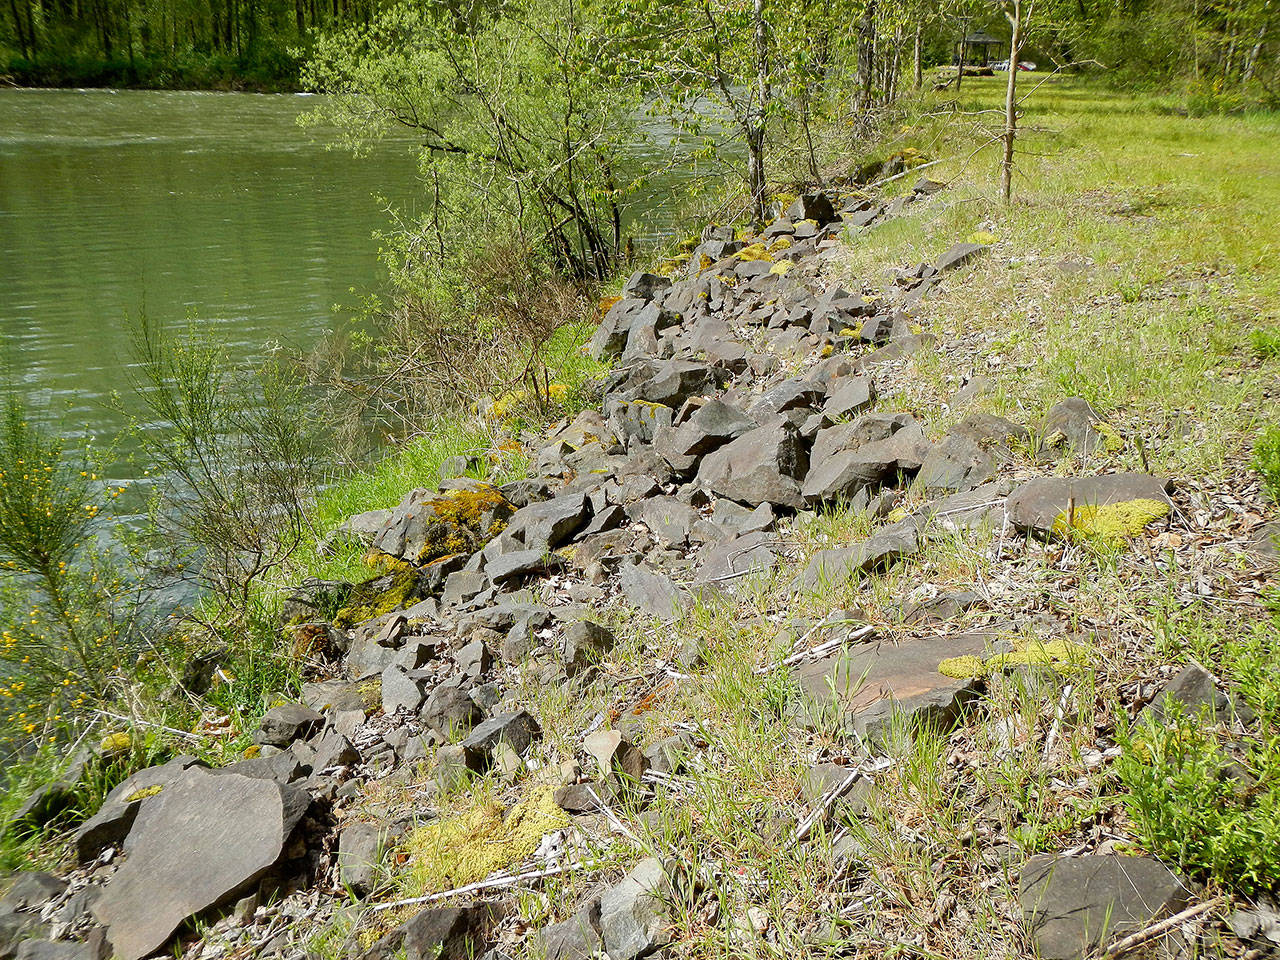 King County proposes to restore a dynamic mosaic of riverine and floodplain habitats along .3 mile of the Middle Green River off Green Valley Road about six miles east of the city of Auburn. COURTESY PHOTO, Washington State Recreation and Conservation Office